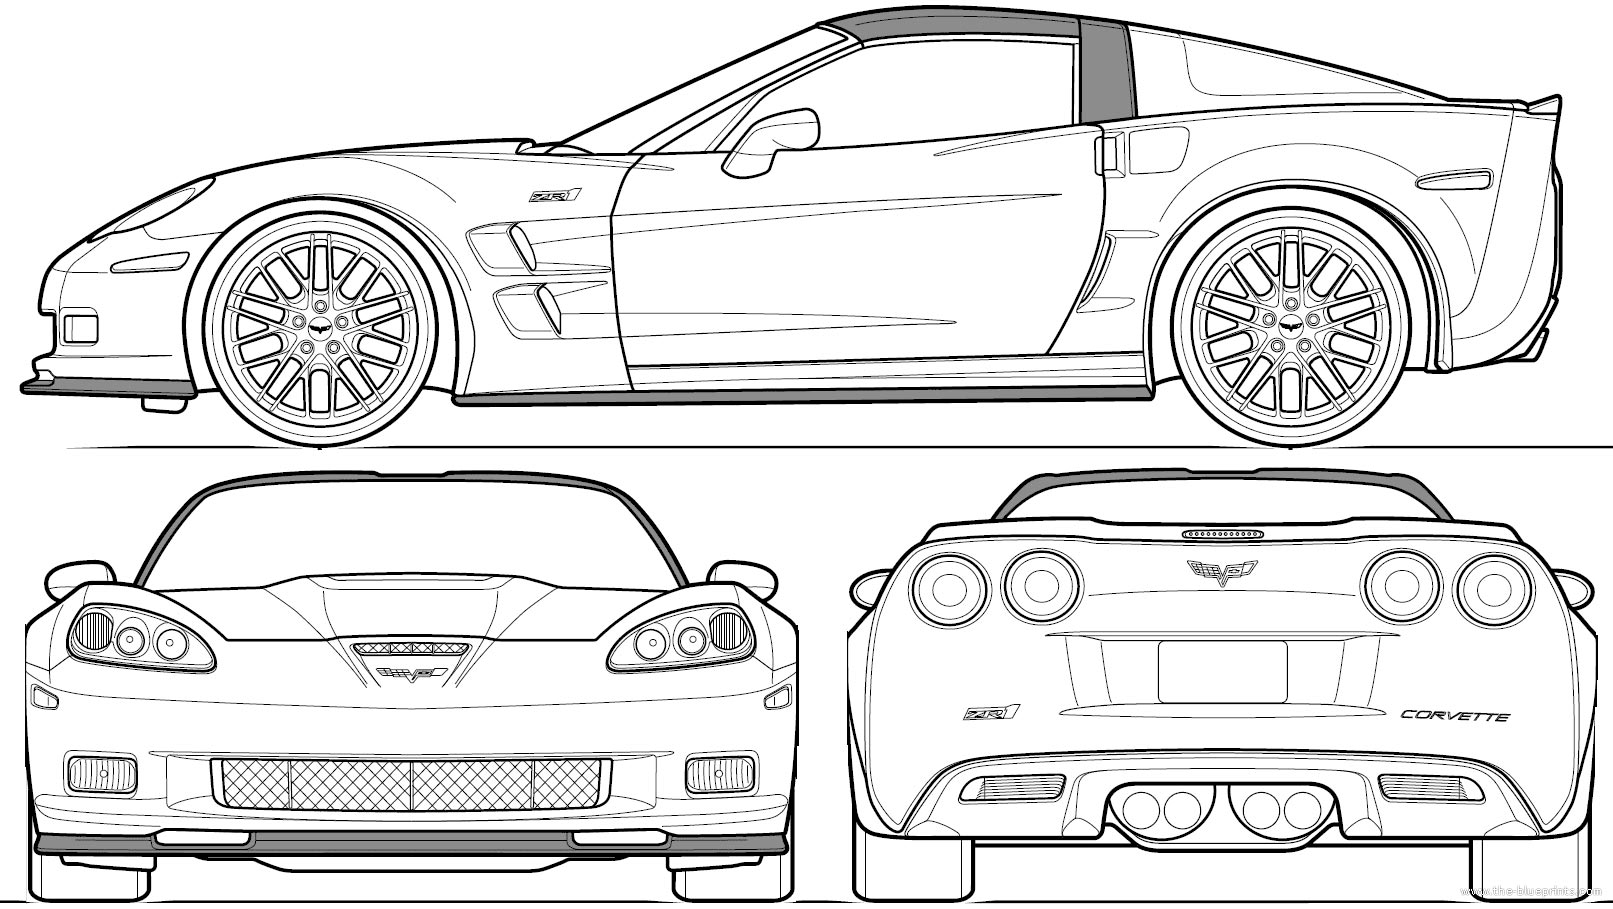 Fighting boredom during lockdown how about some corvette coloring pages